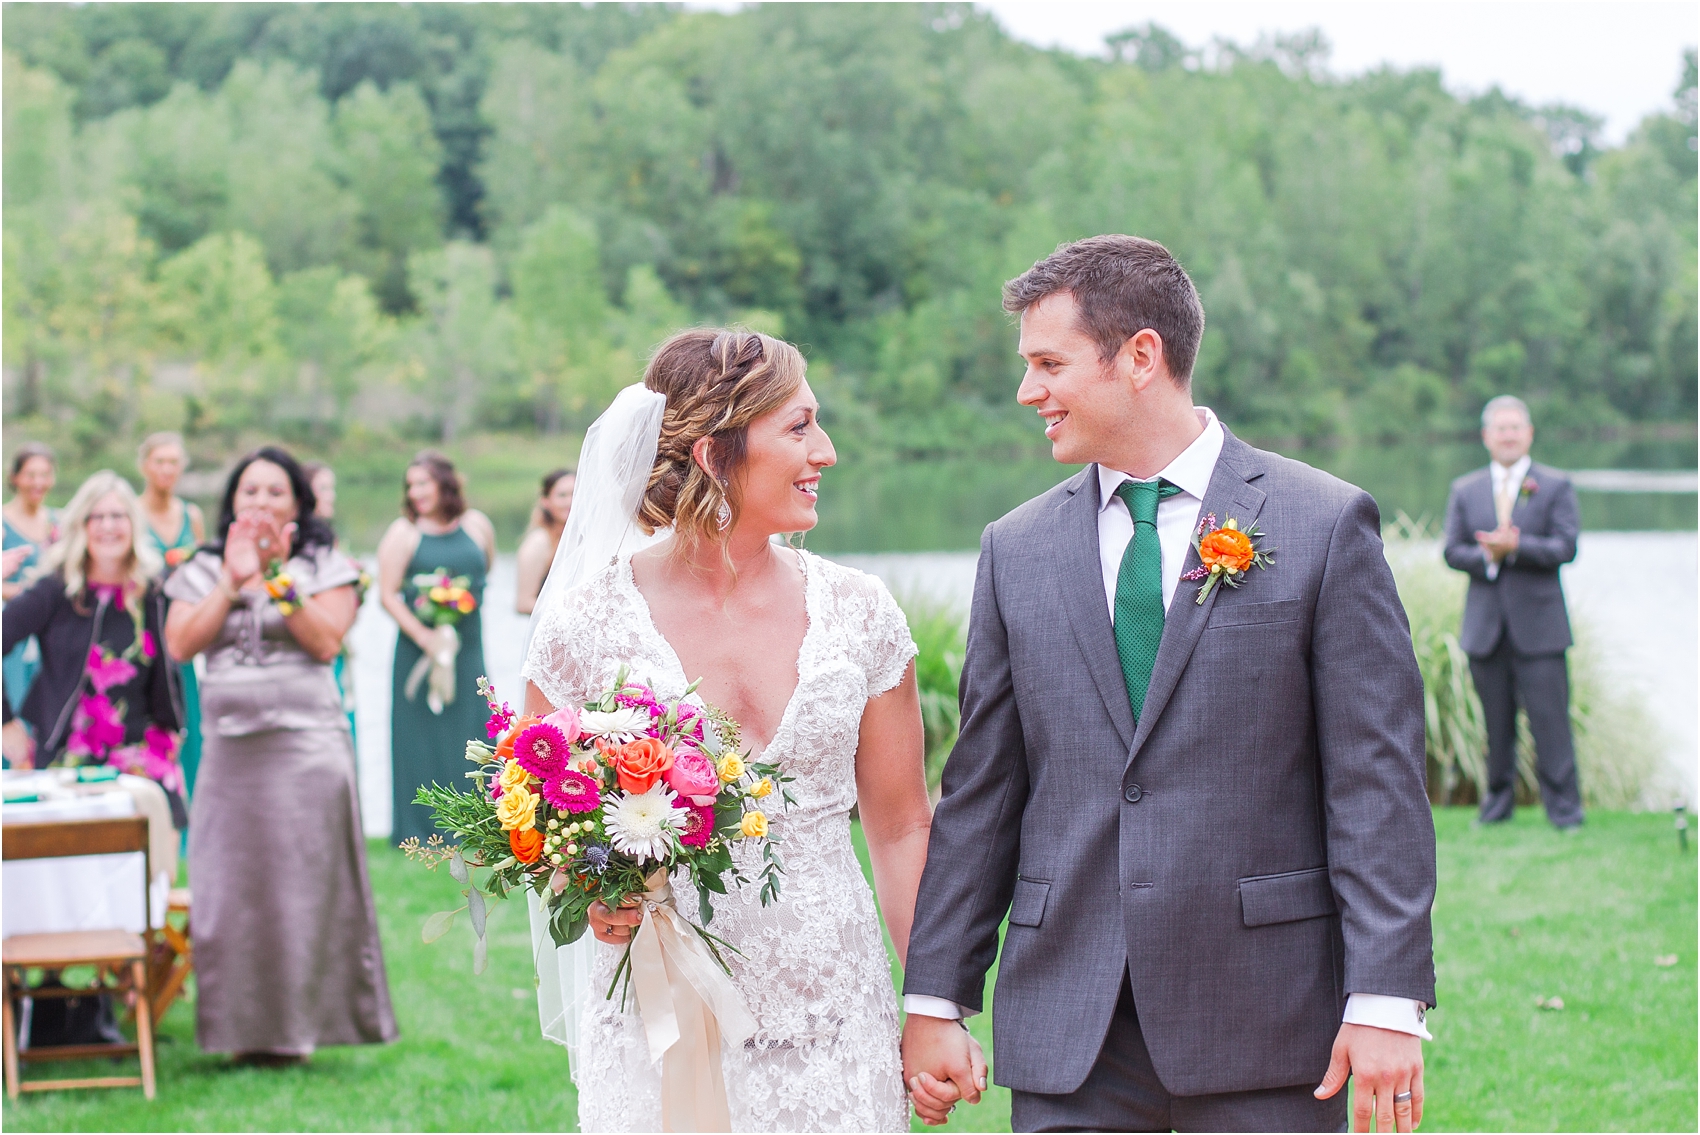 romantic-intimate-backyard-wedding-photos-at-private-estate-in-ann-arbor-mi-by-courtney-carolyn-photography_0112.jpg